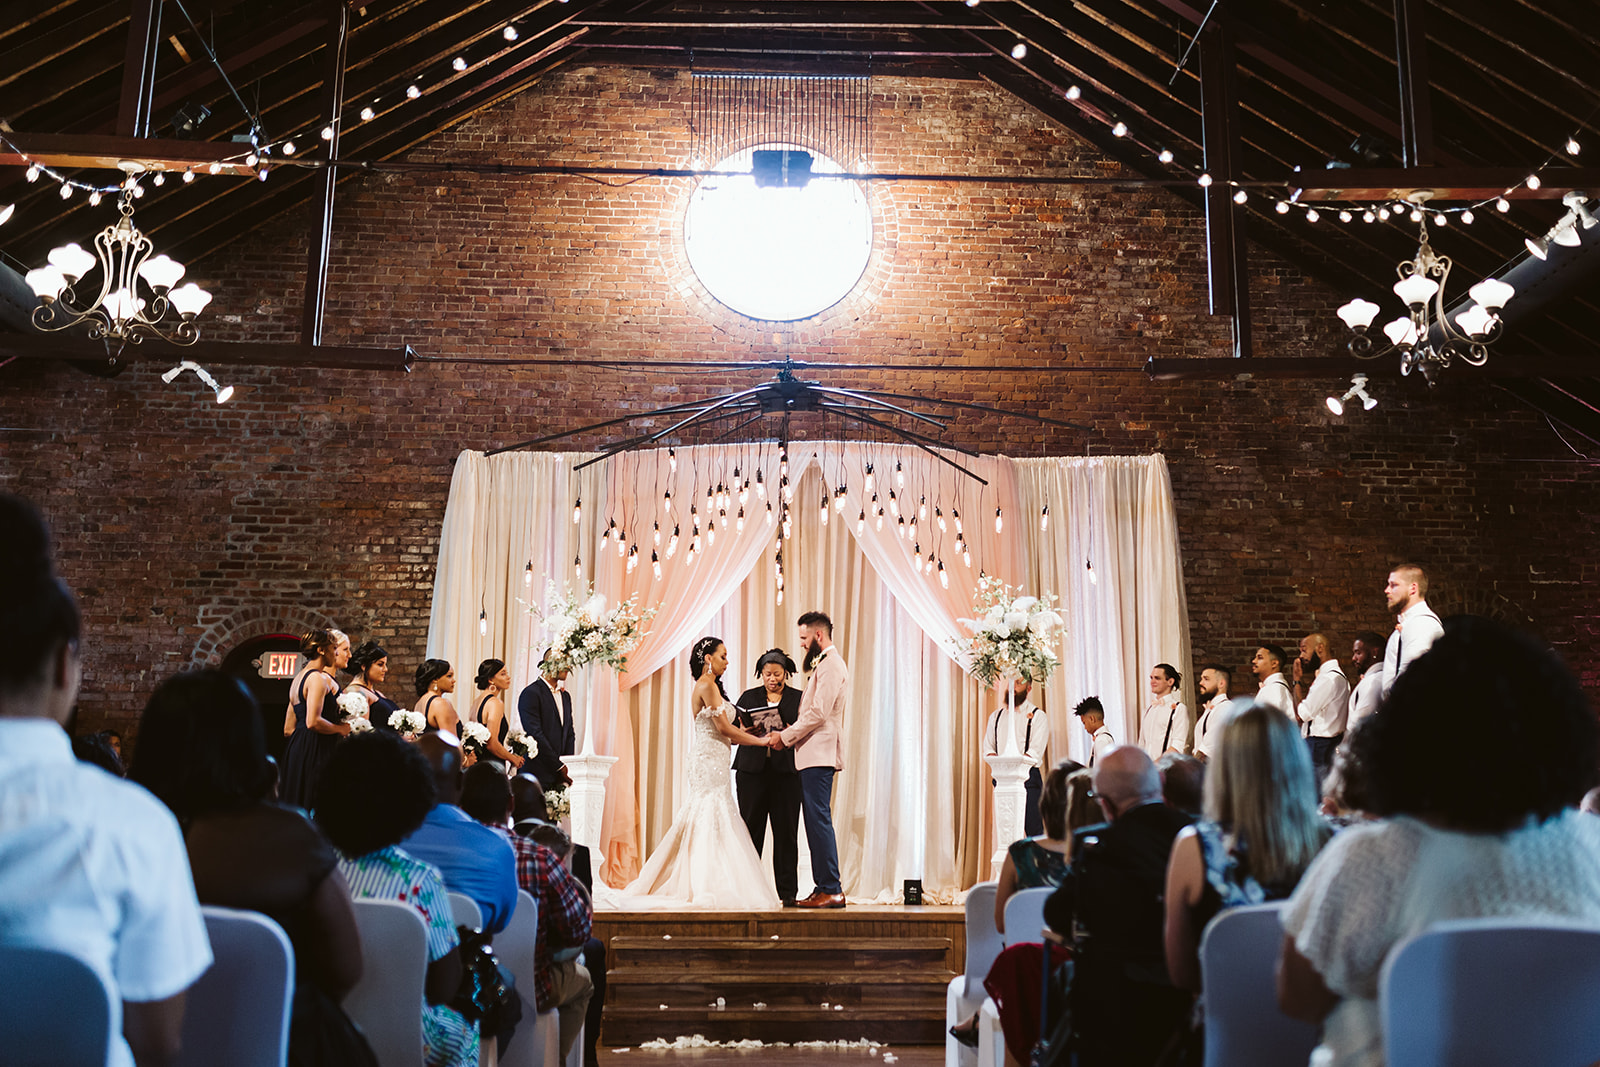 A bride and groom exchange vows in front of white drapery on an exposed brick wall.